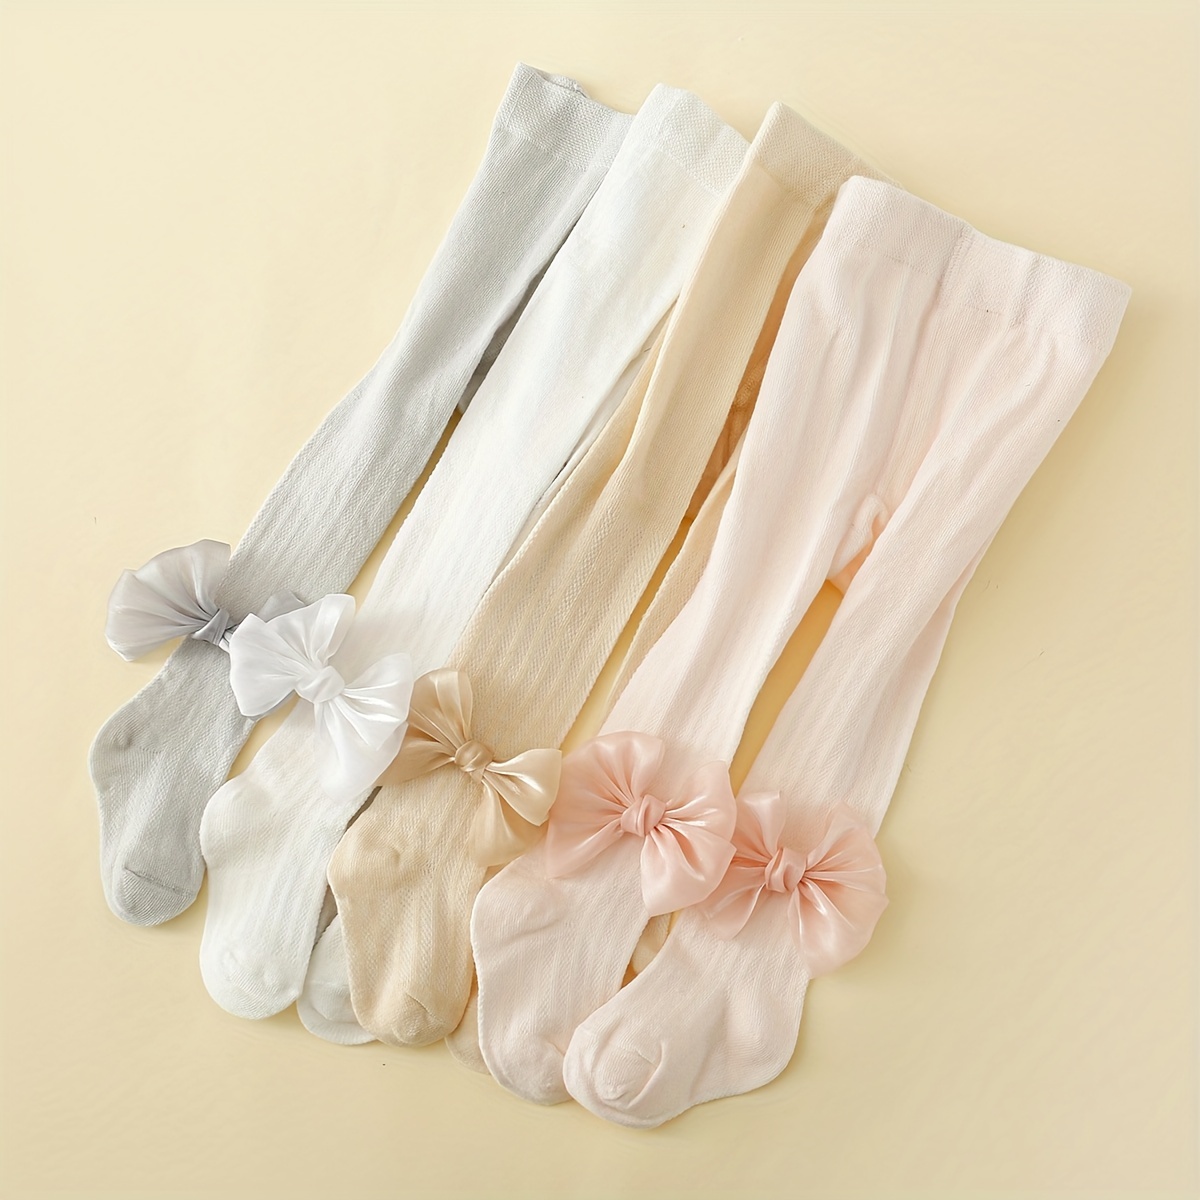 

4 Pairs Of Girl's Thin Pantyhose Floret With Bowknot, Solid Children's Toddlers Base Layer Fashion Leggings Pantyhose